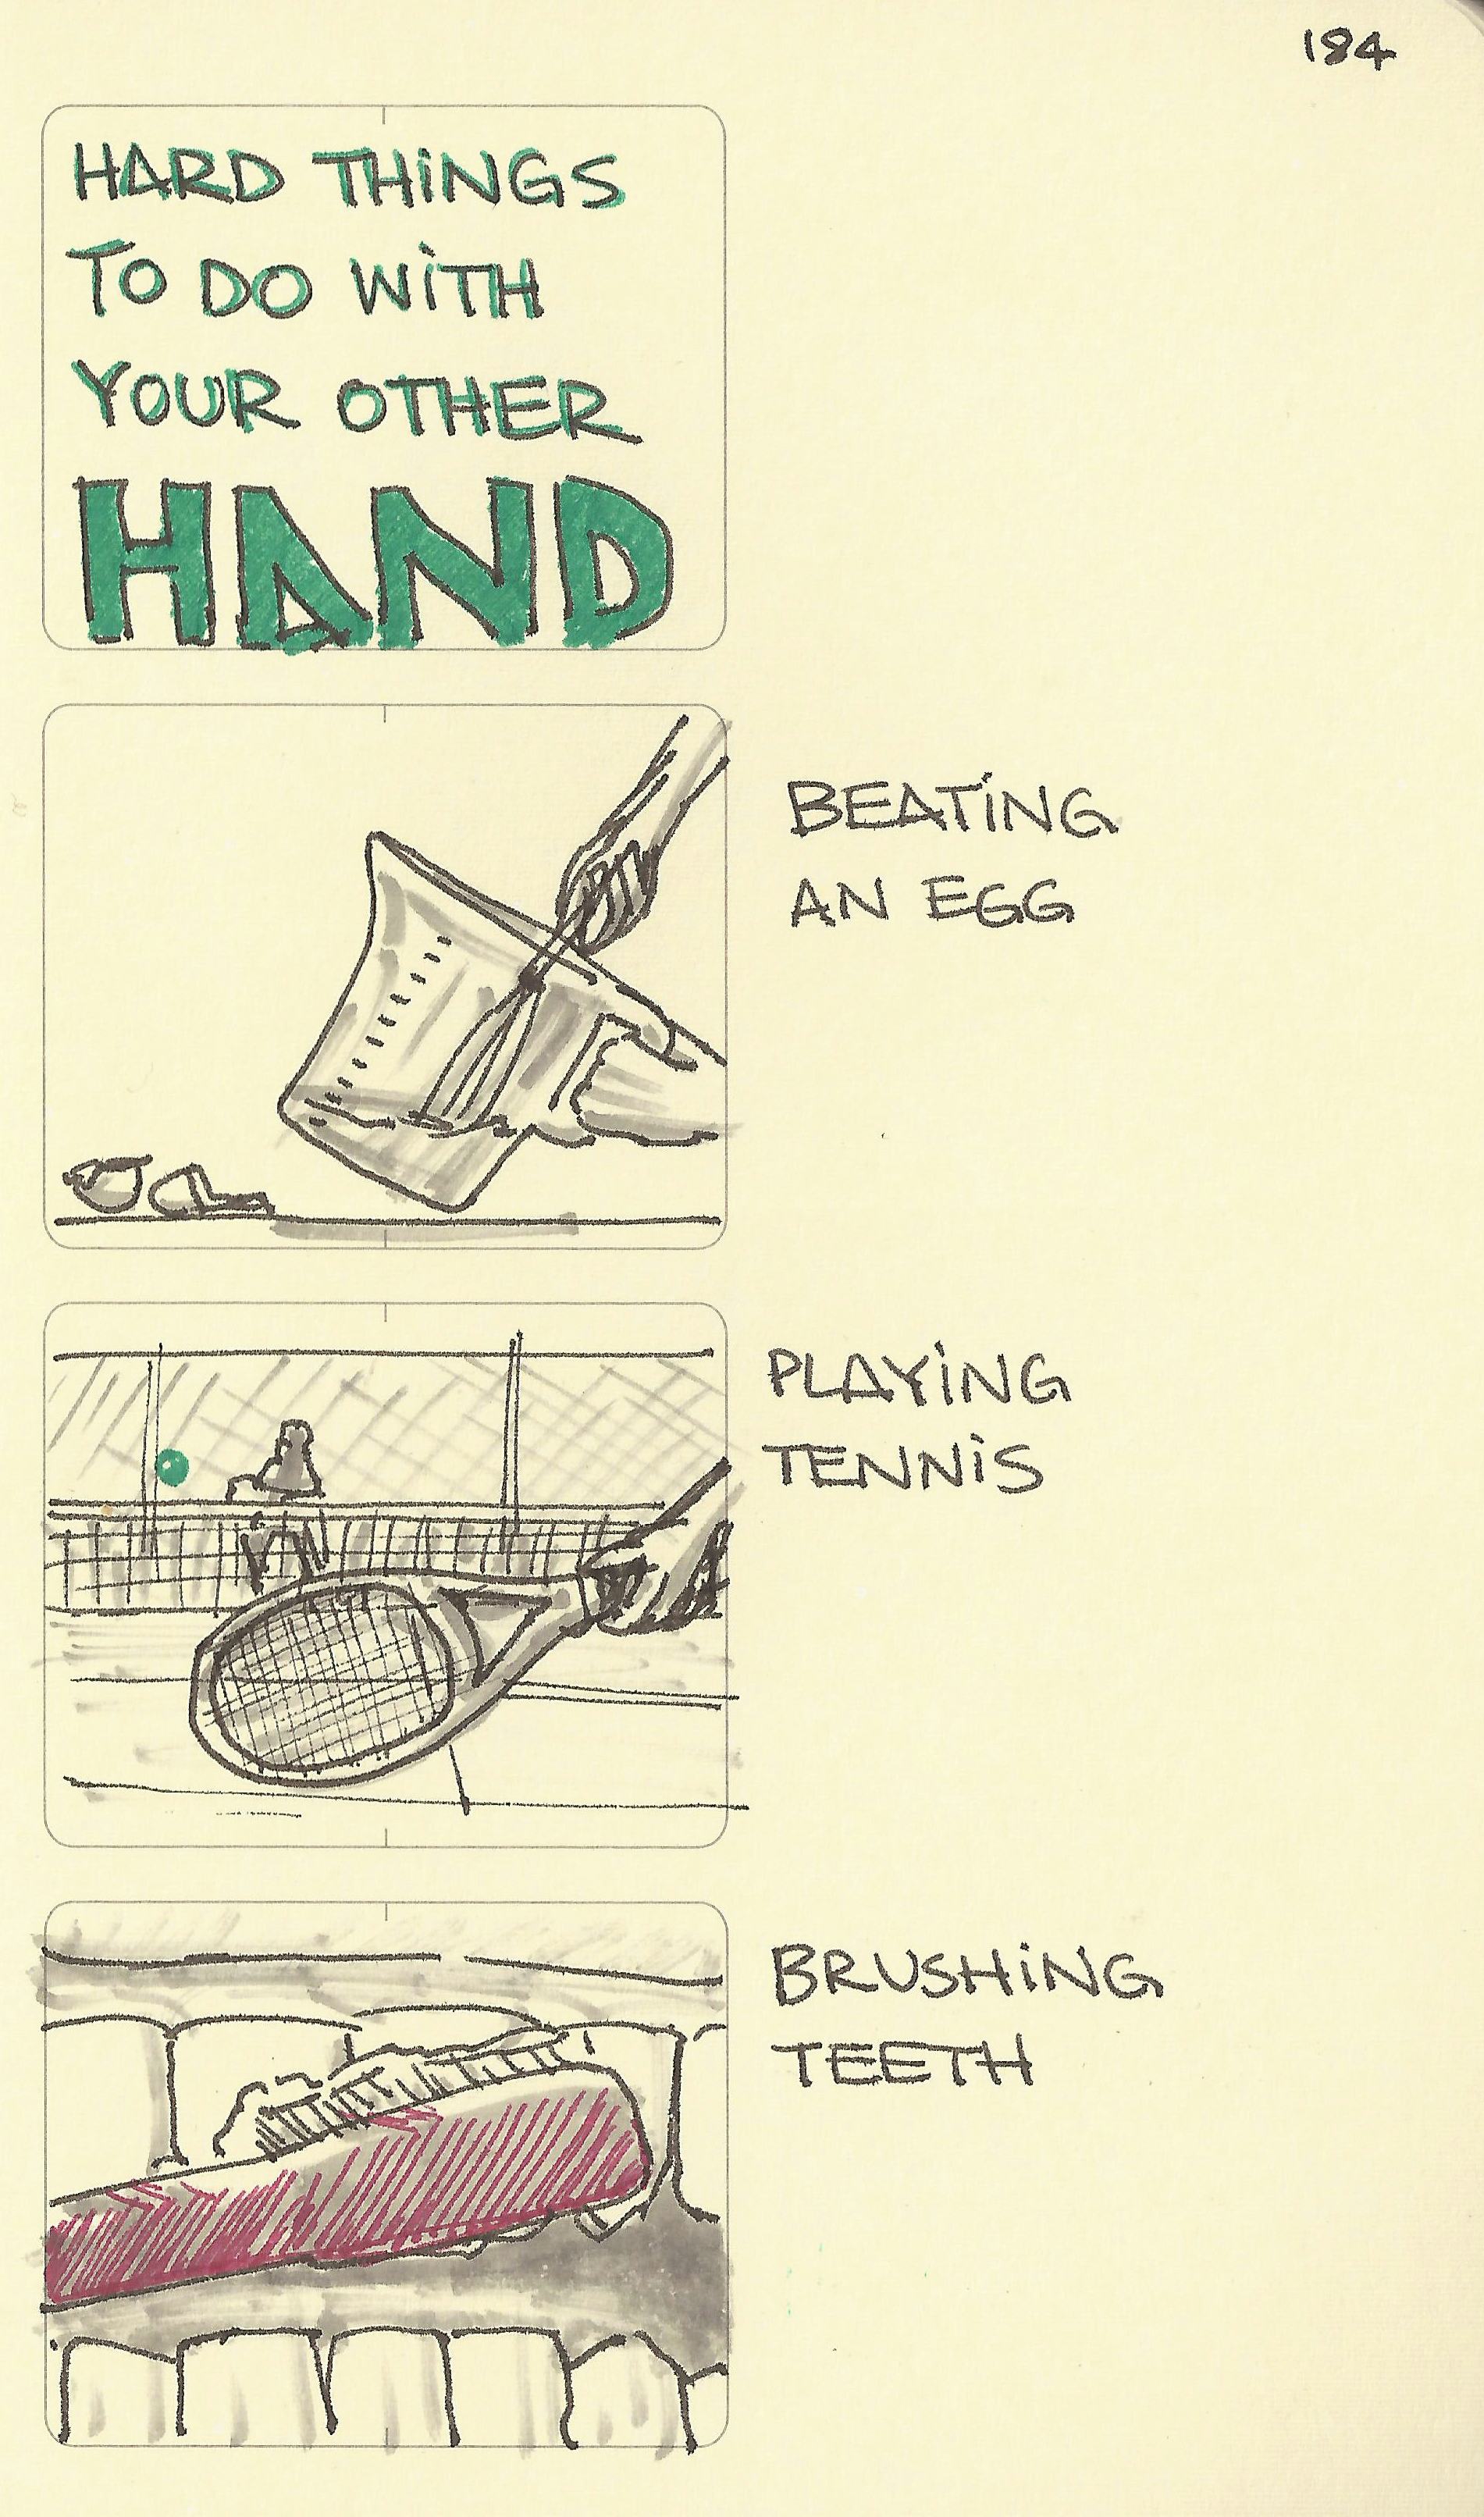 Hard things to do with your other hand - Sketchplanations